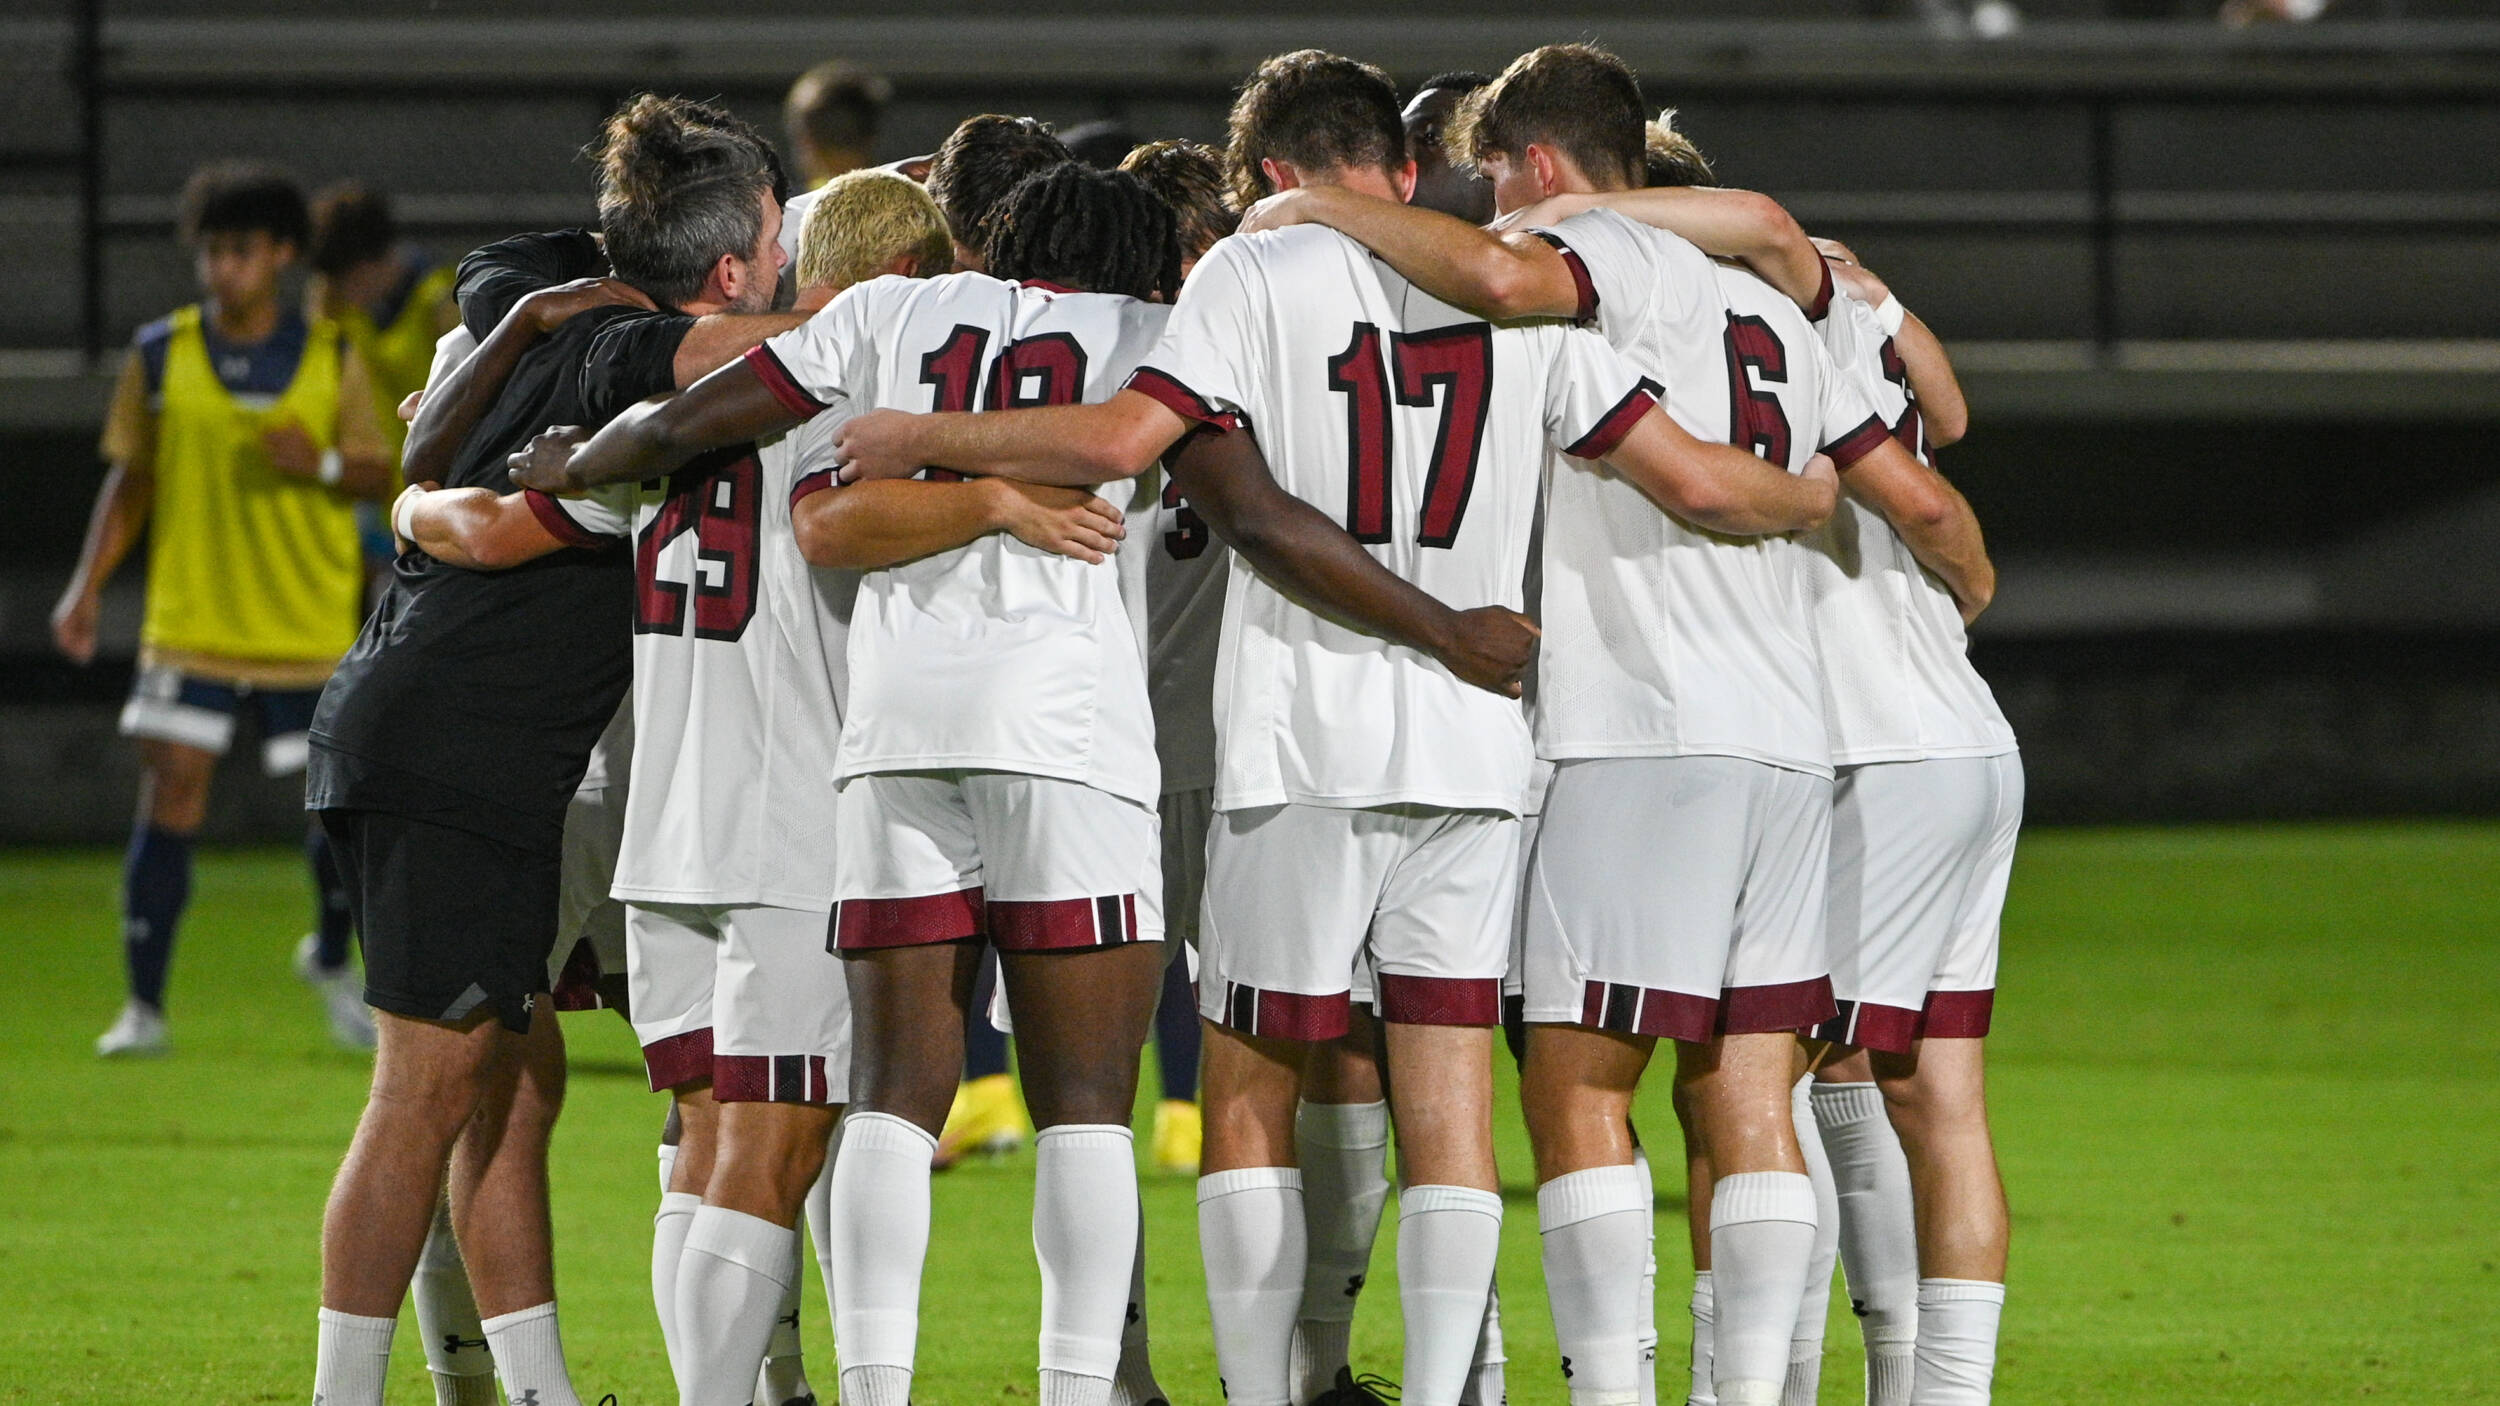 Six Student-Athletes Named to the CSC Men's Soccer Academic All-District Team